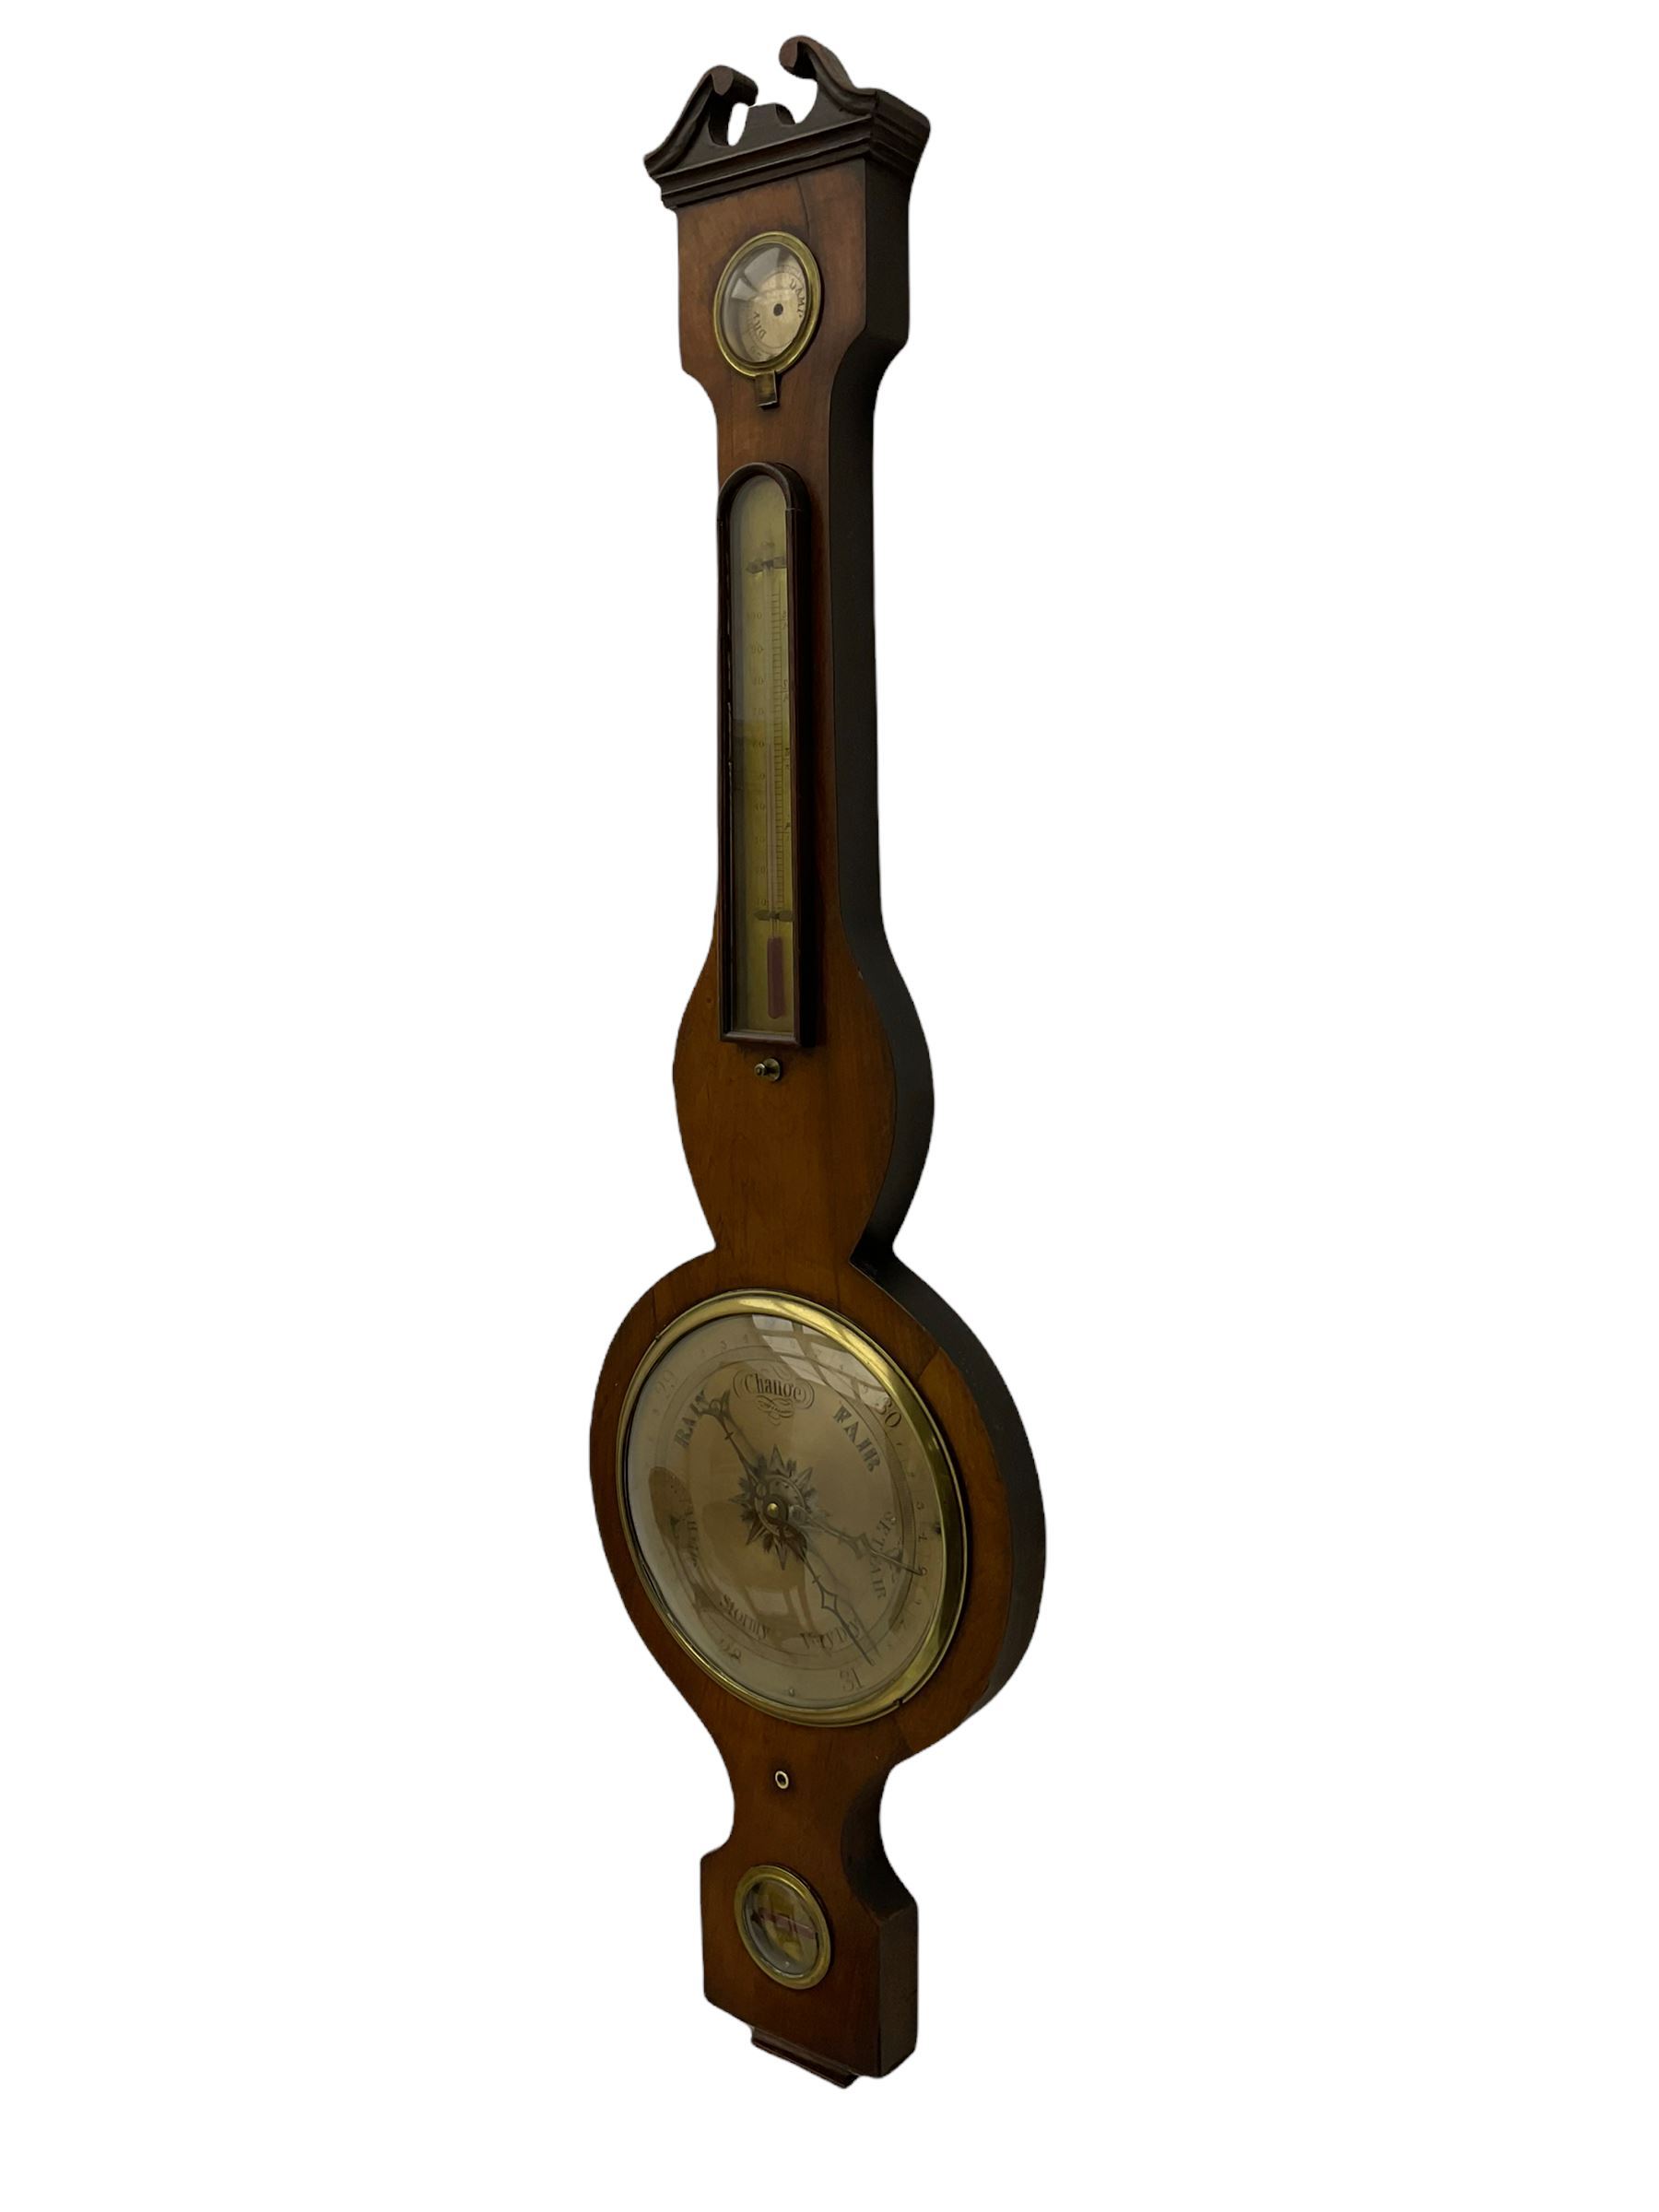 A 19th century four instrument mercury wheel barometer in a mahogany case with a swans neck pediment - Image 2 of 4